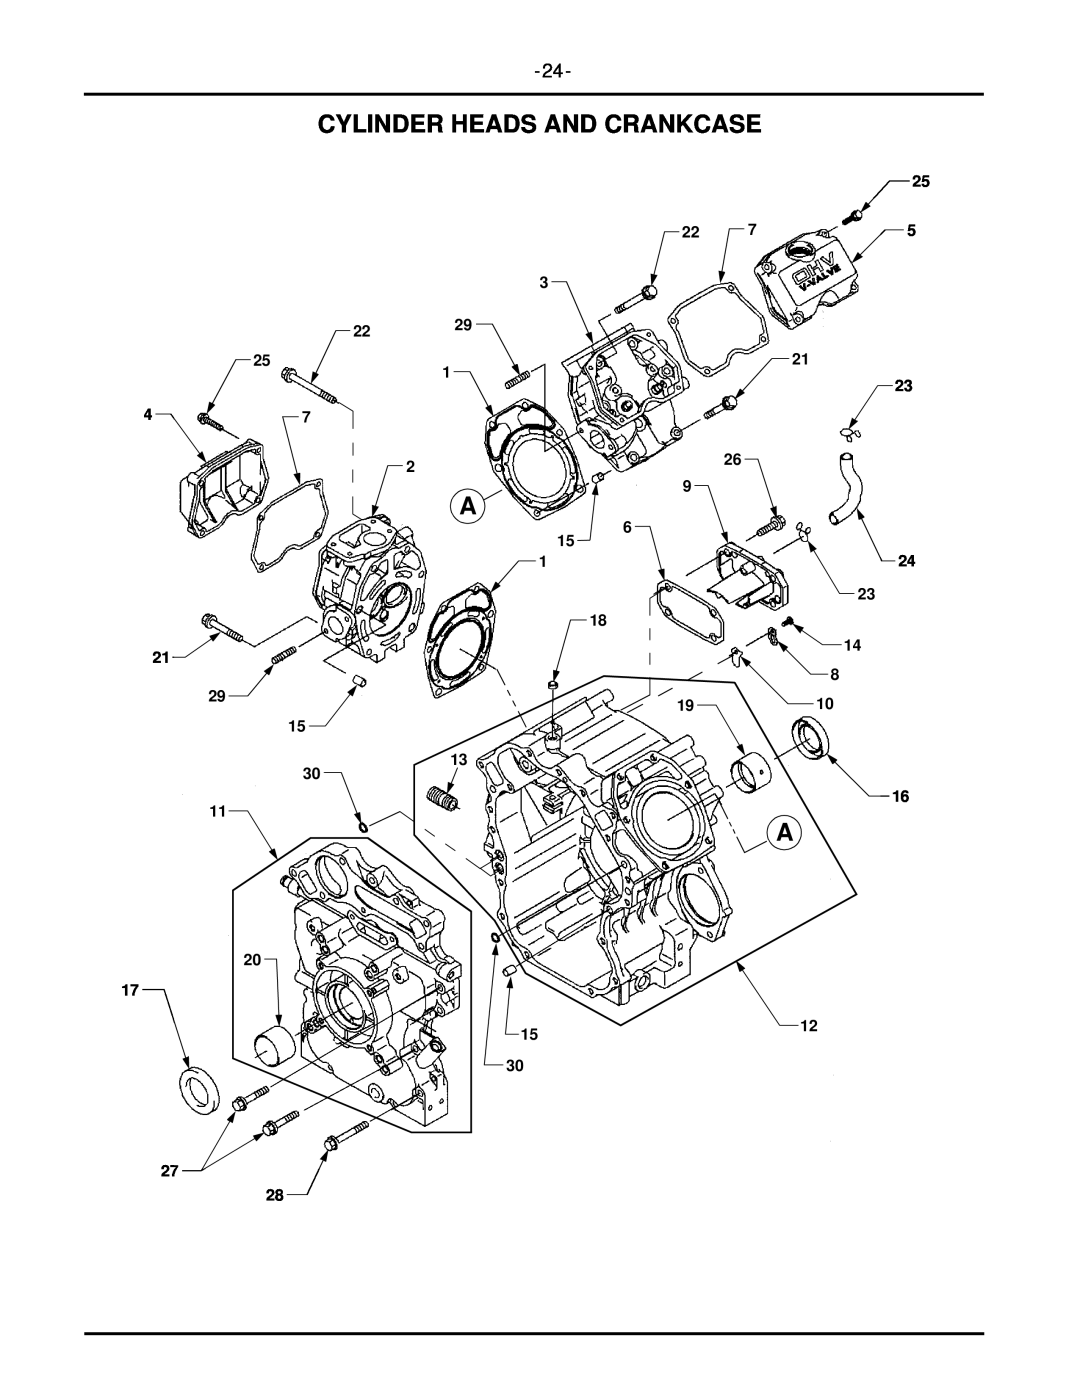 MTD 7252 manual Cylinder Heads And Crankcase 